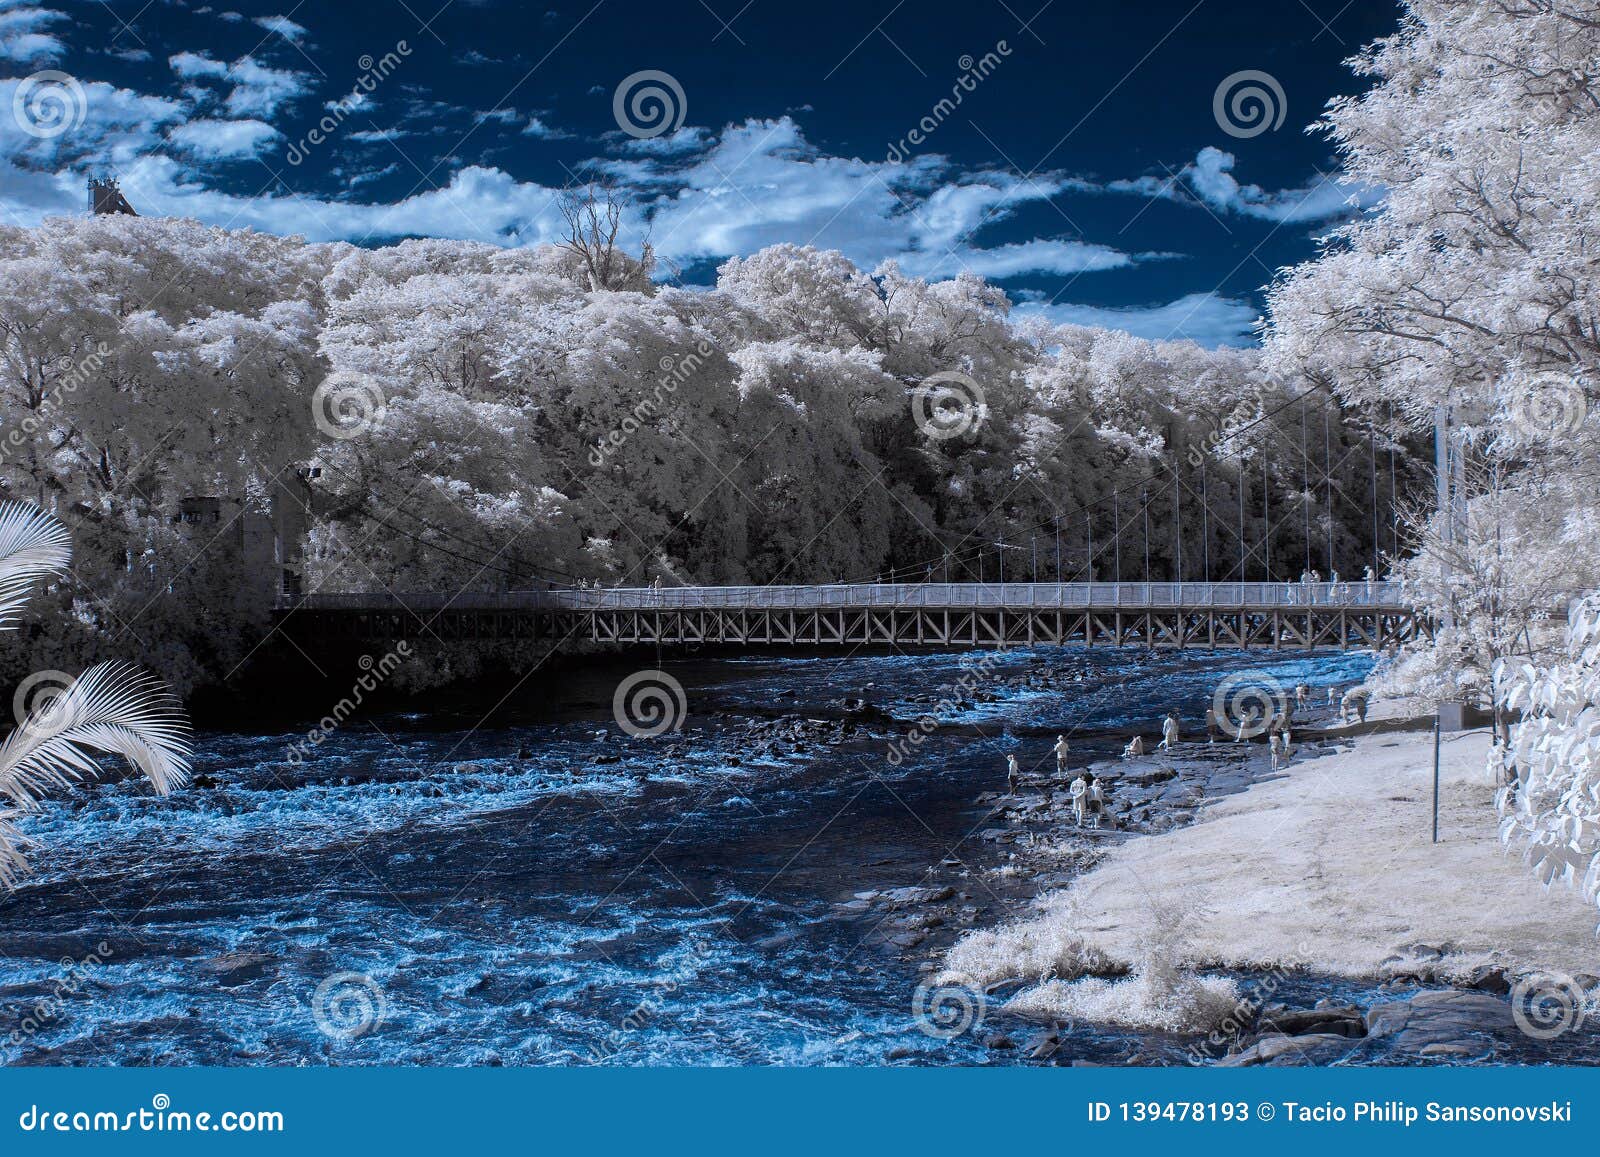 piracicaba river and city in infrared - - 720nm